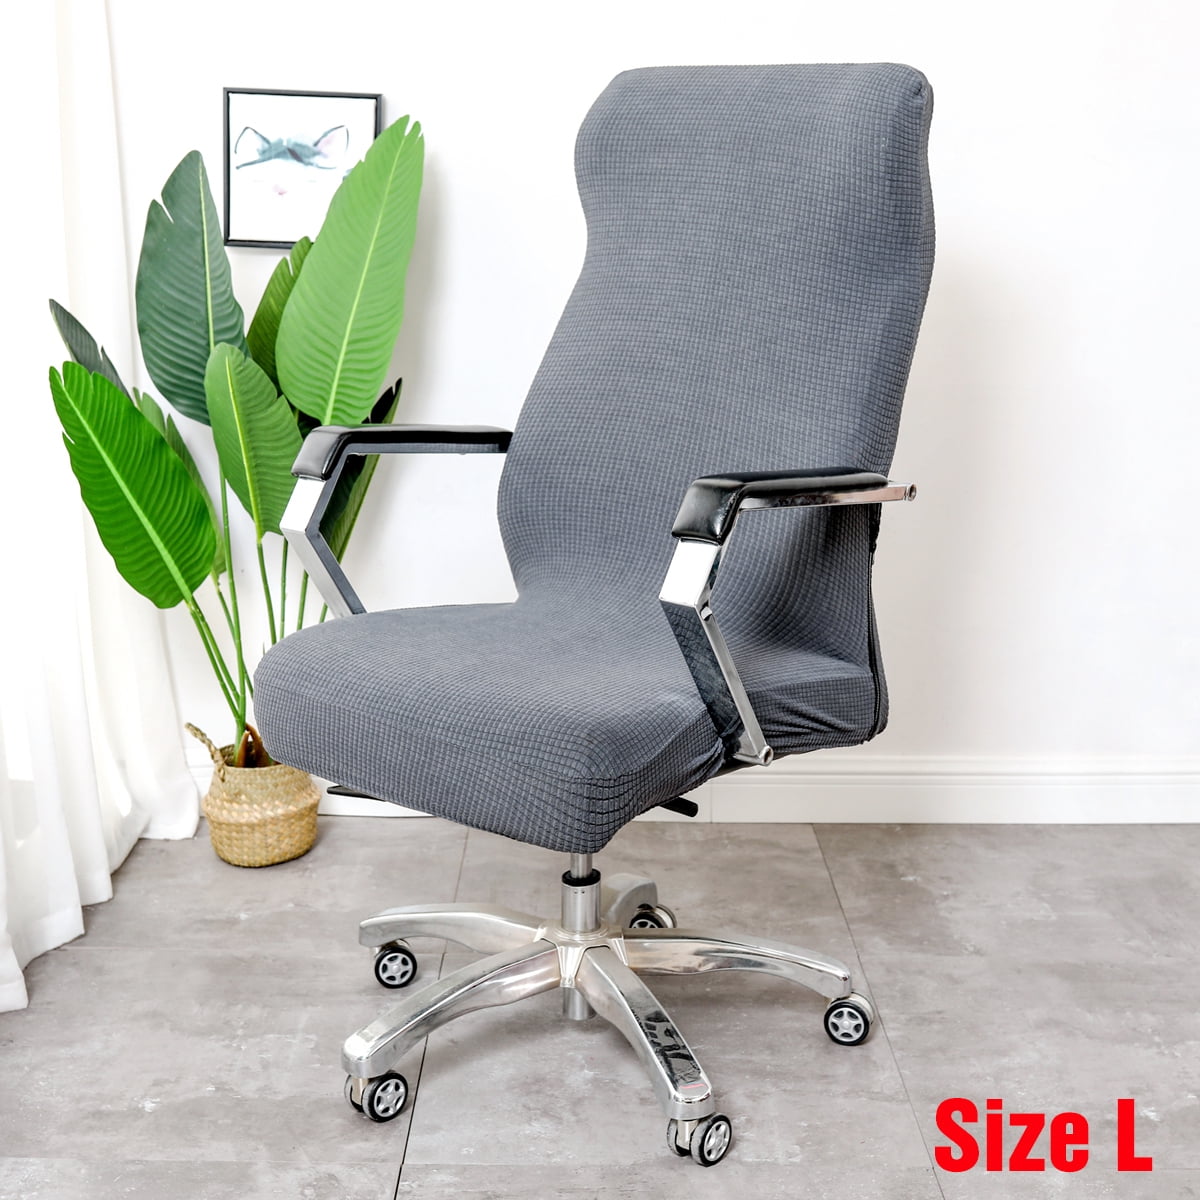 1pc Gaming Chair Office Computer Chair Modern Swivel Ergonomic Desk Chair Covers 